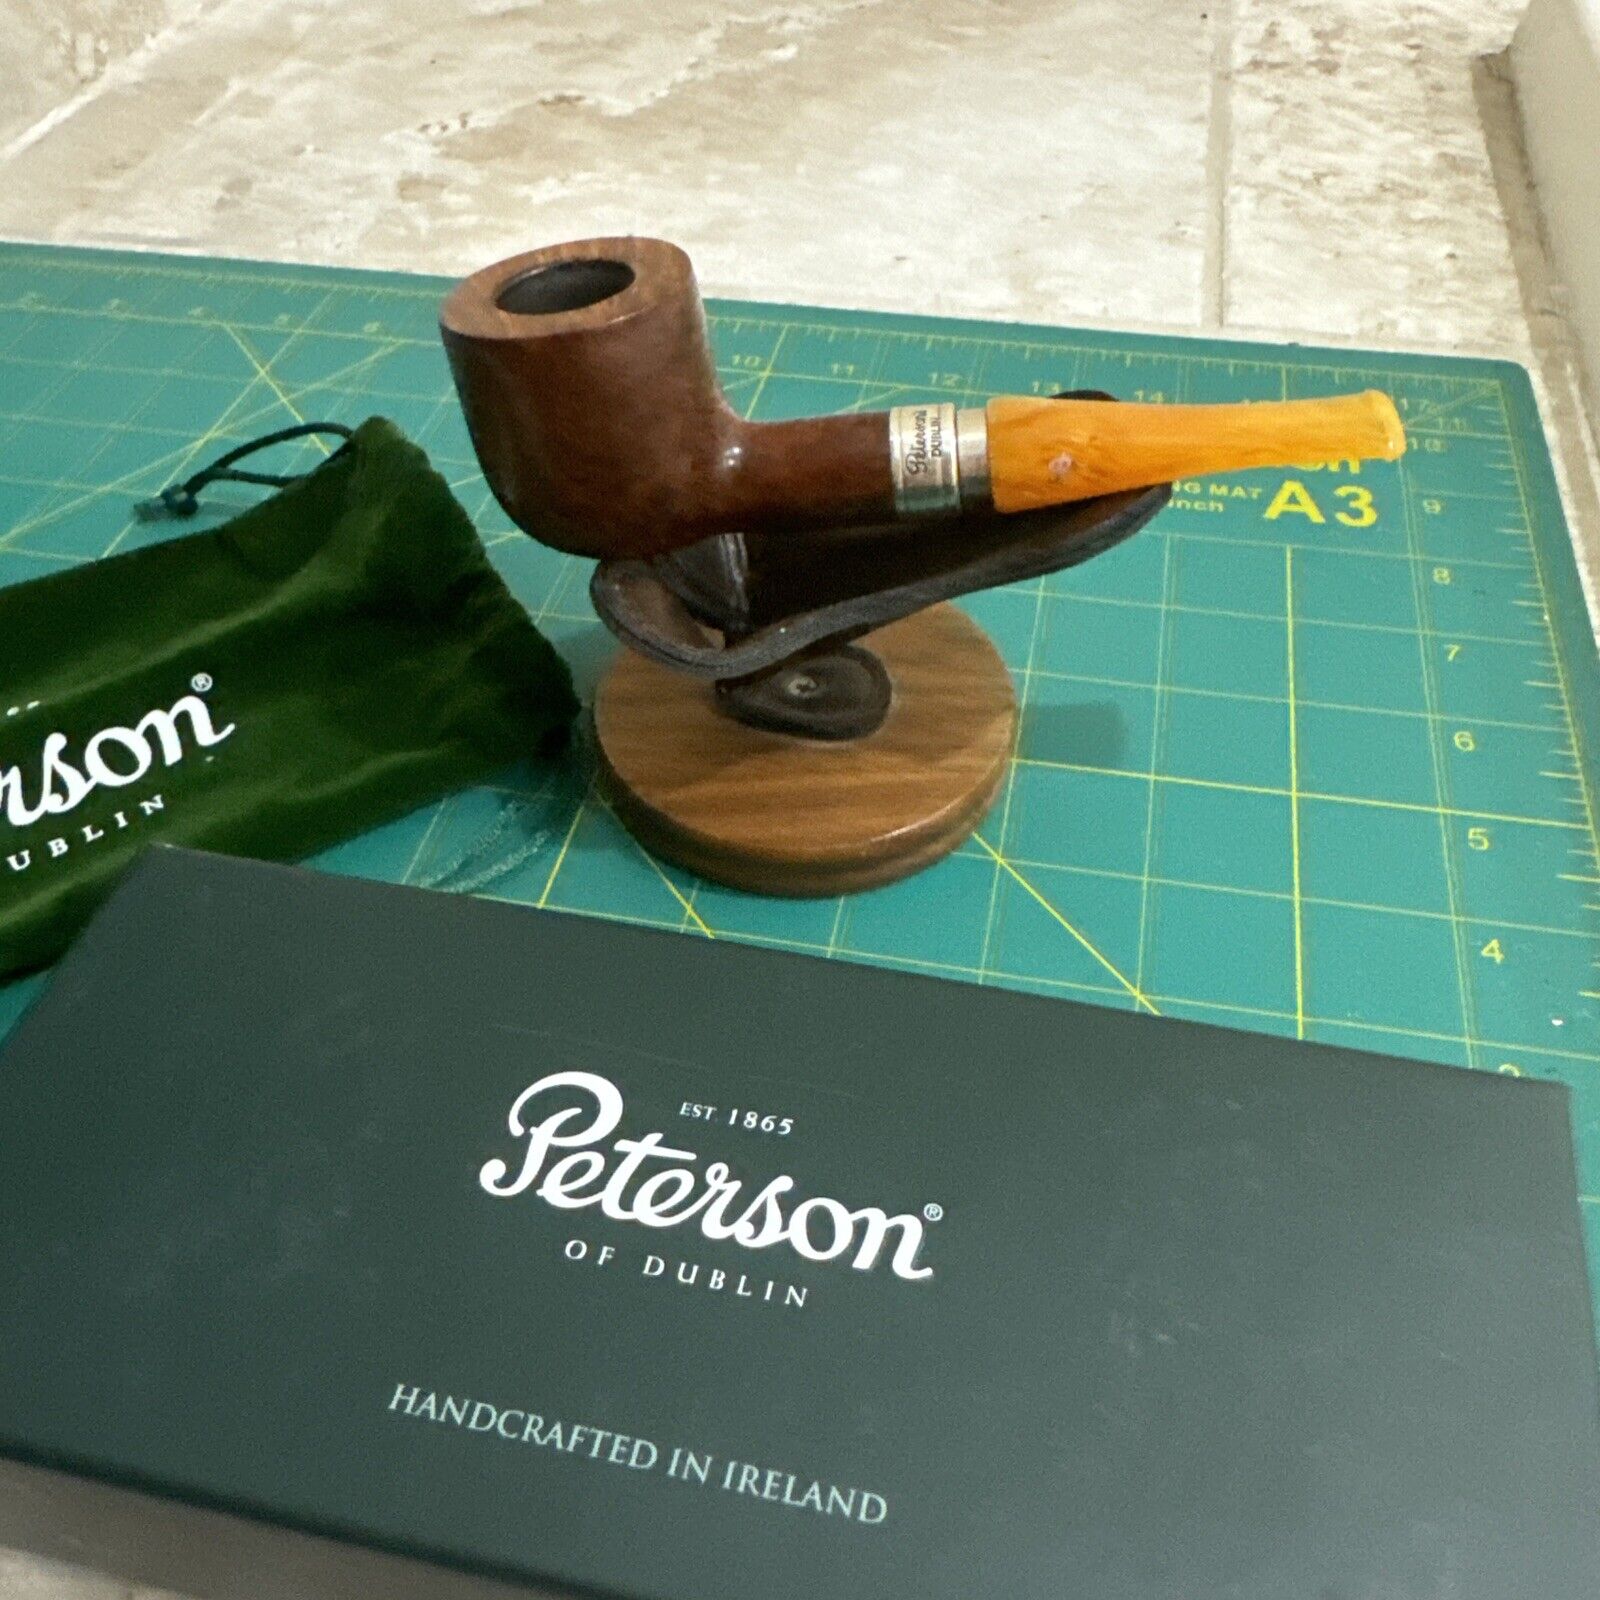 Peterson Rosslare Tobacco Pipe 606 Great Condition Beautiful Sterling Silver 